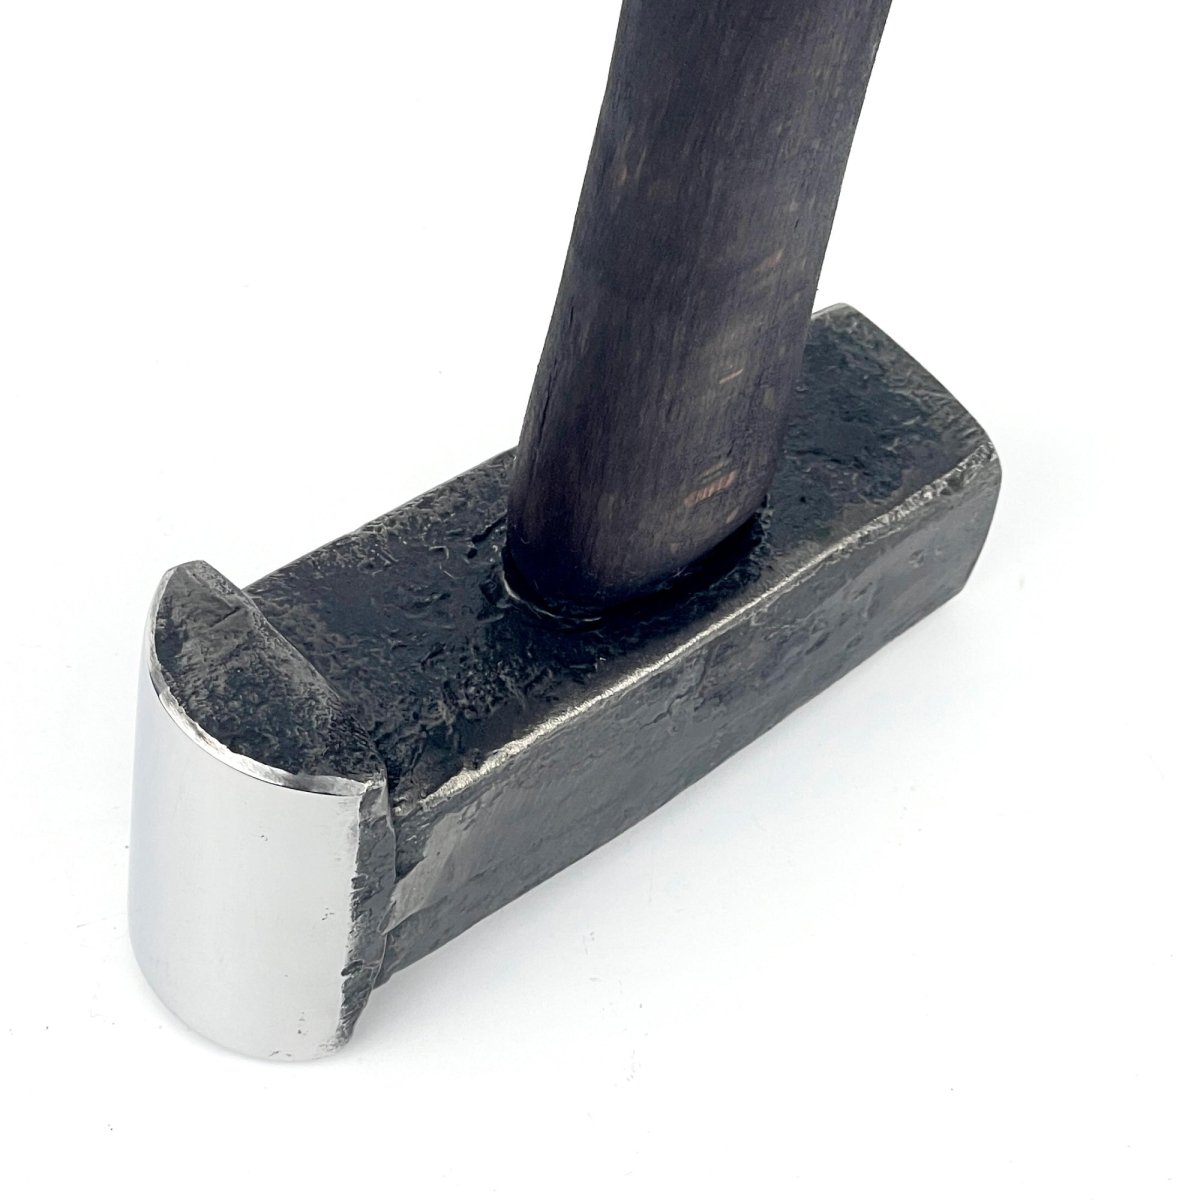 Top fuller hammer for blacksmiths 2.5lbs from AncientSmithy